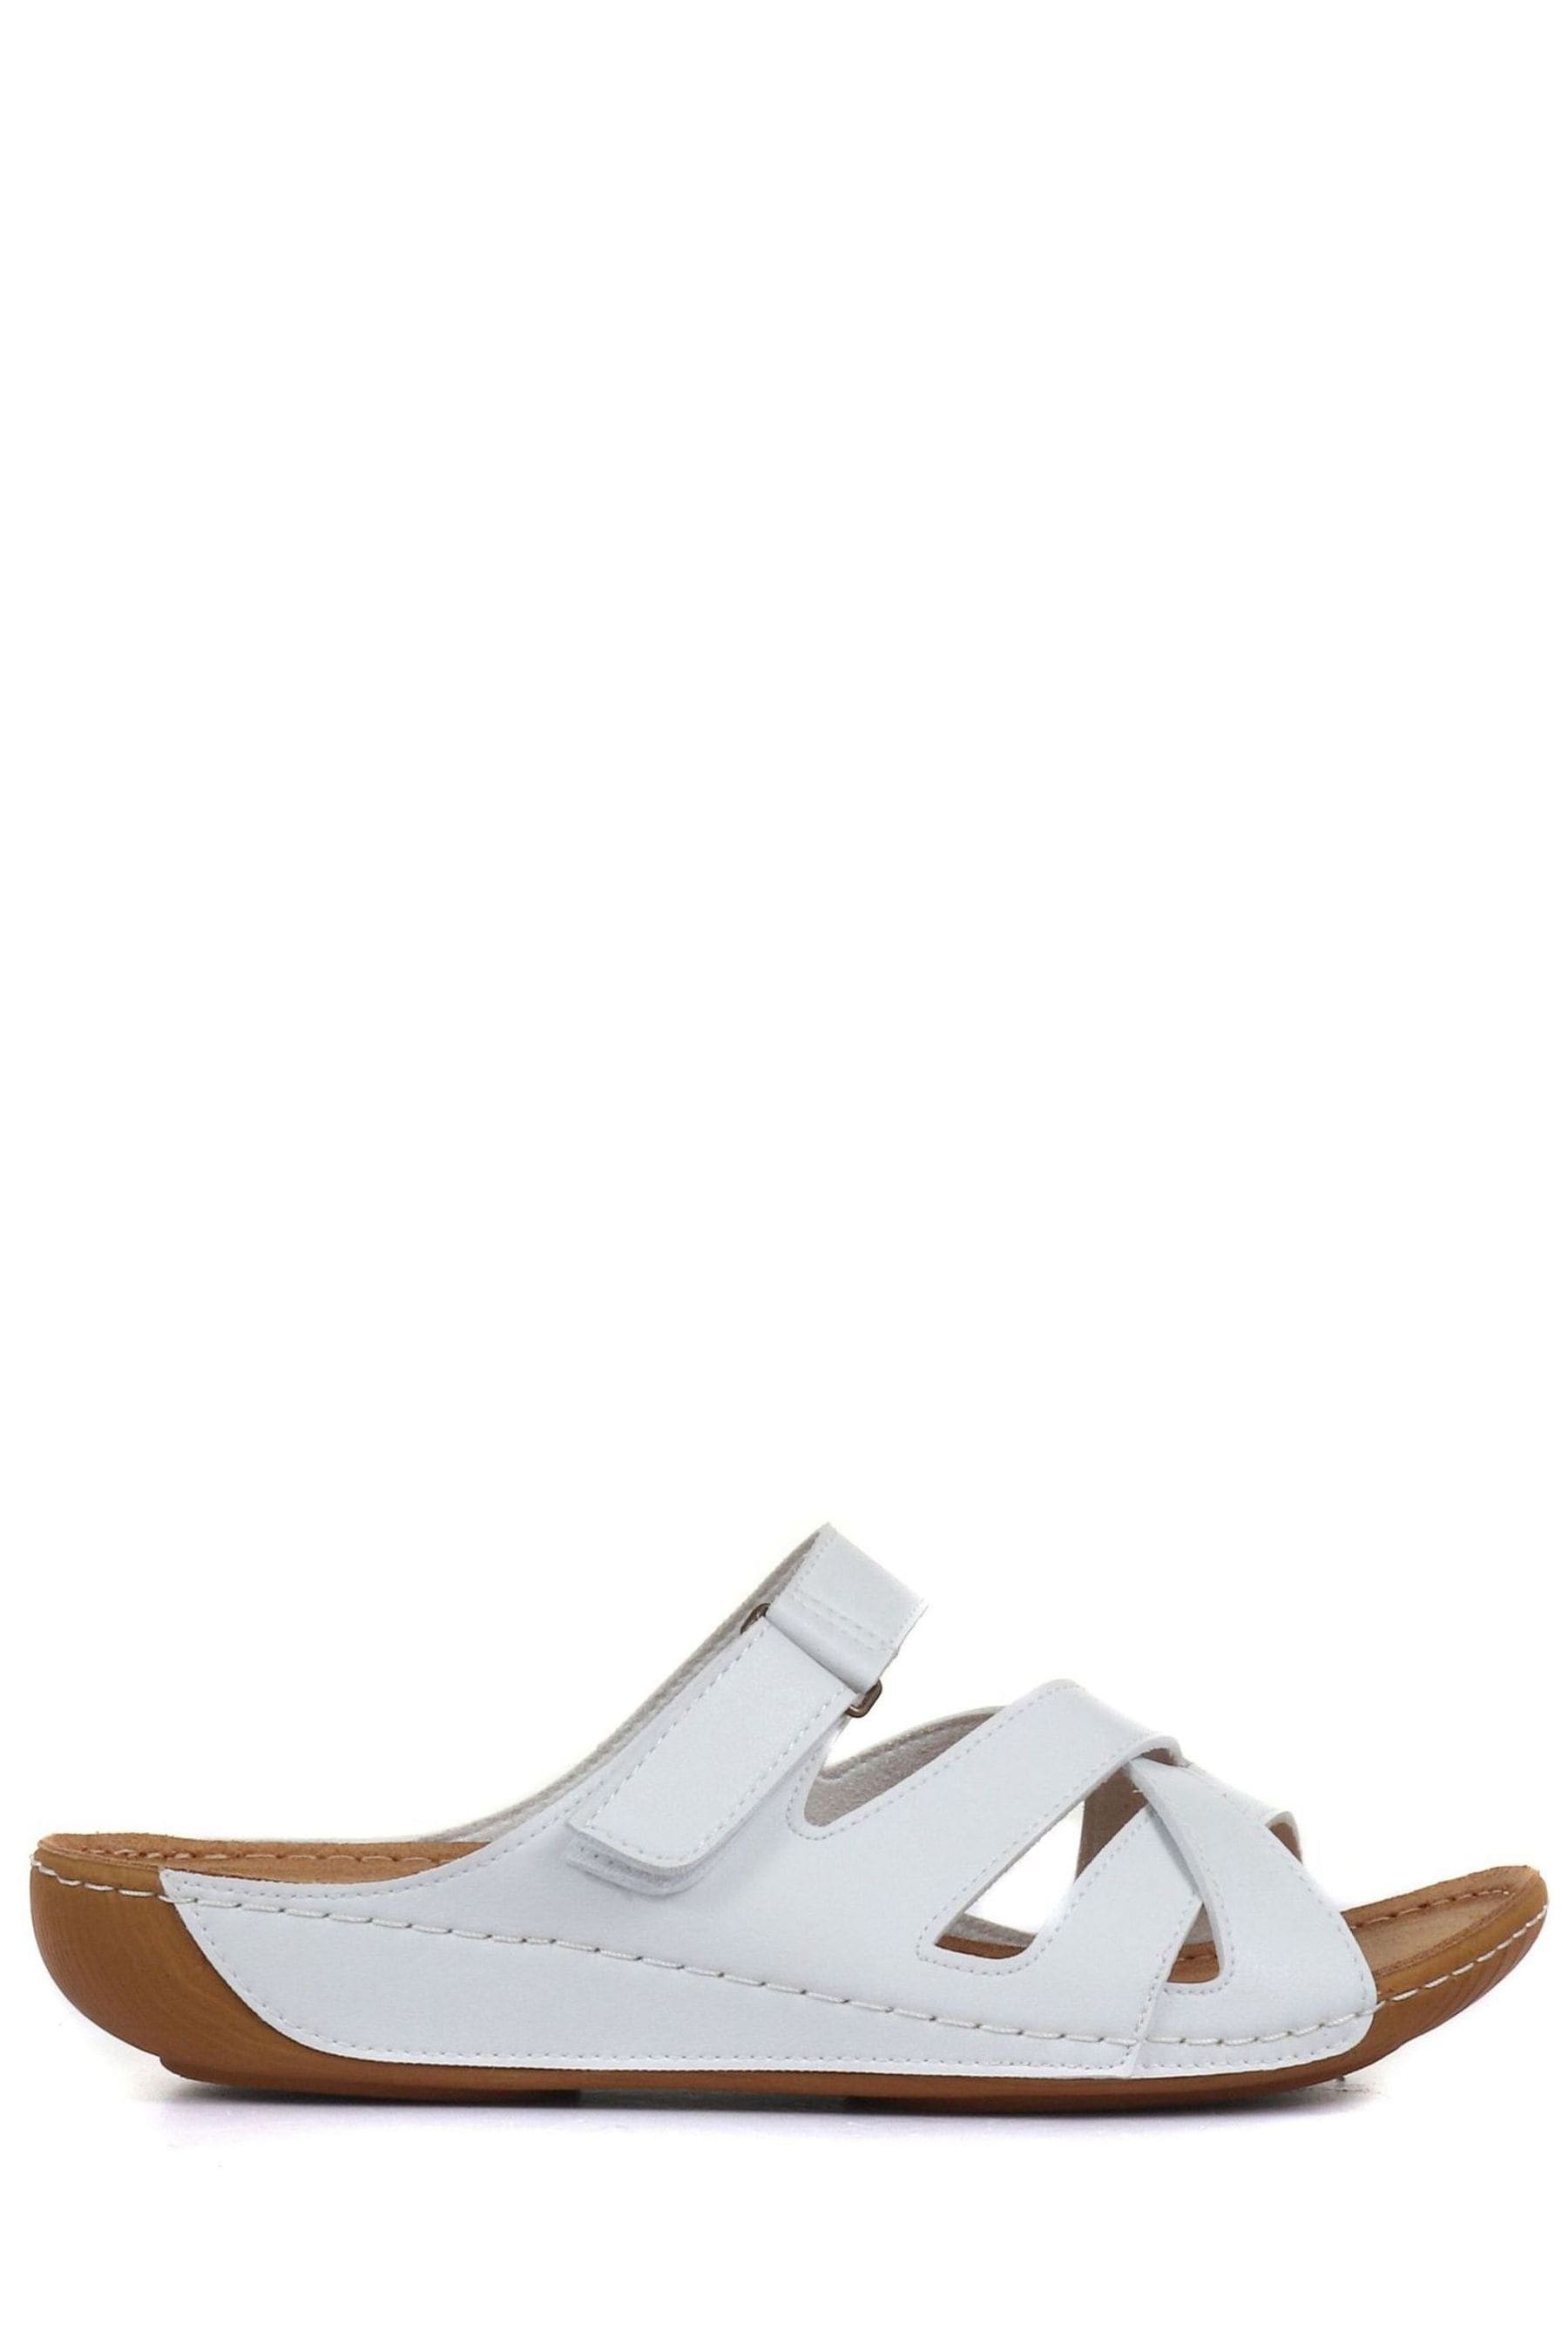 Buy Pavers White Ladies Touch Fasten Mules from the Next UK online shop